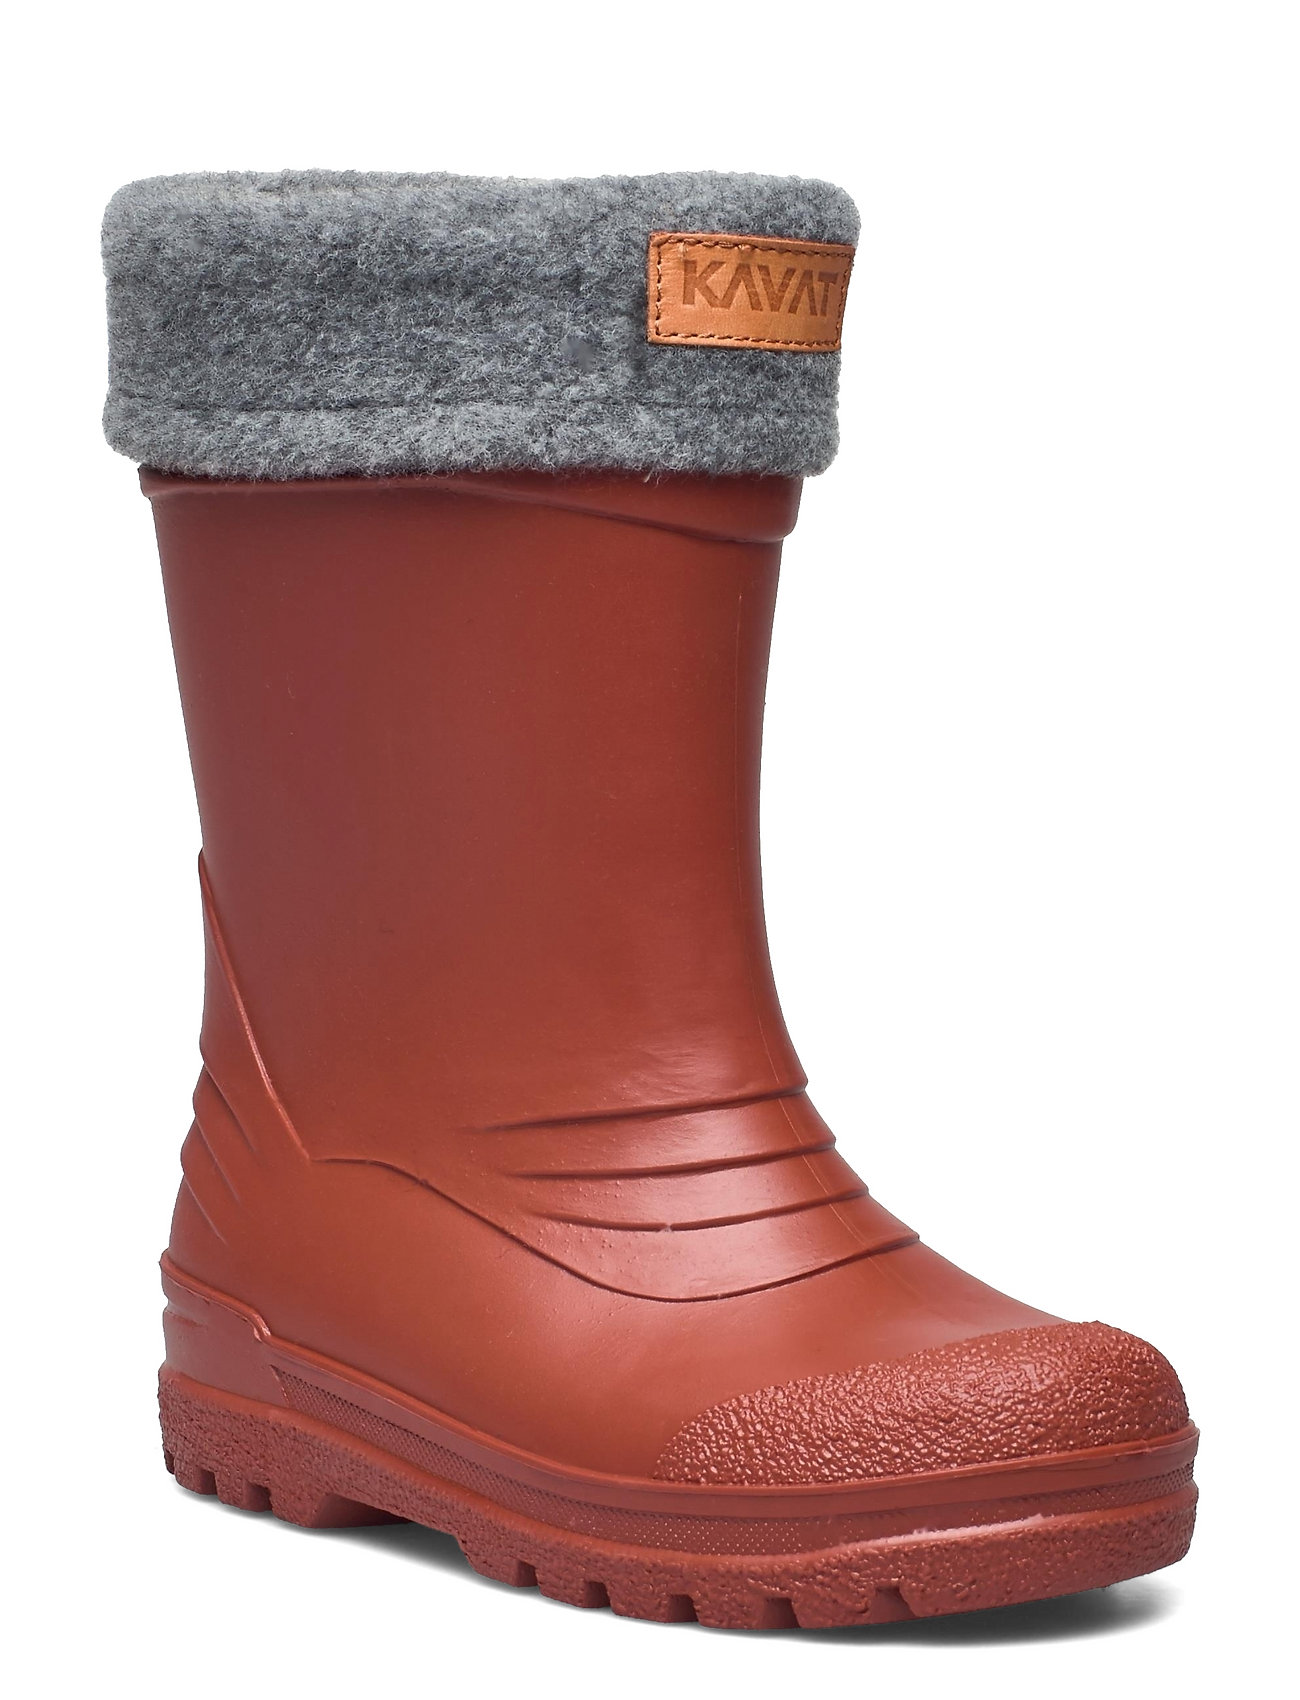 Gimo Wp Shoes Rubberboots Lined Rubberboots Punainen Kavat